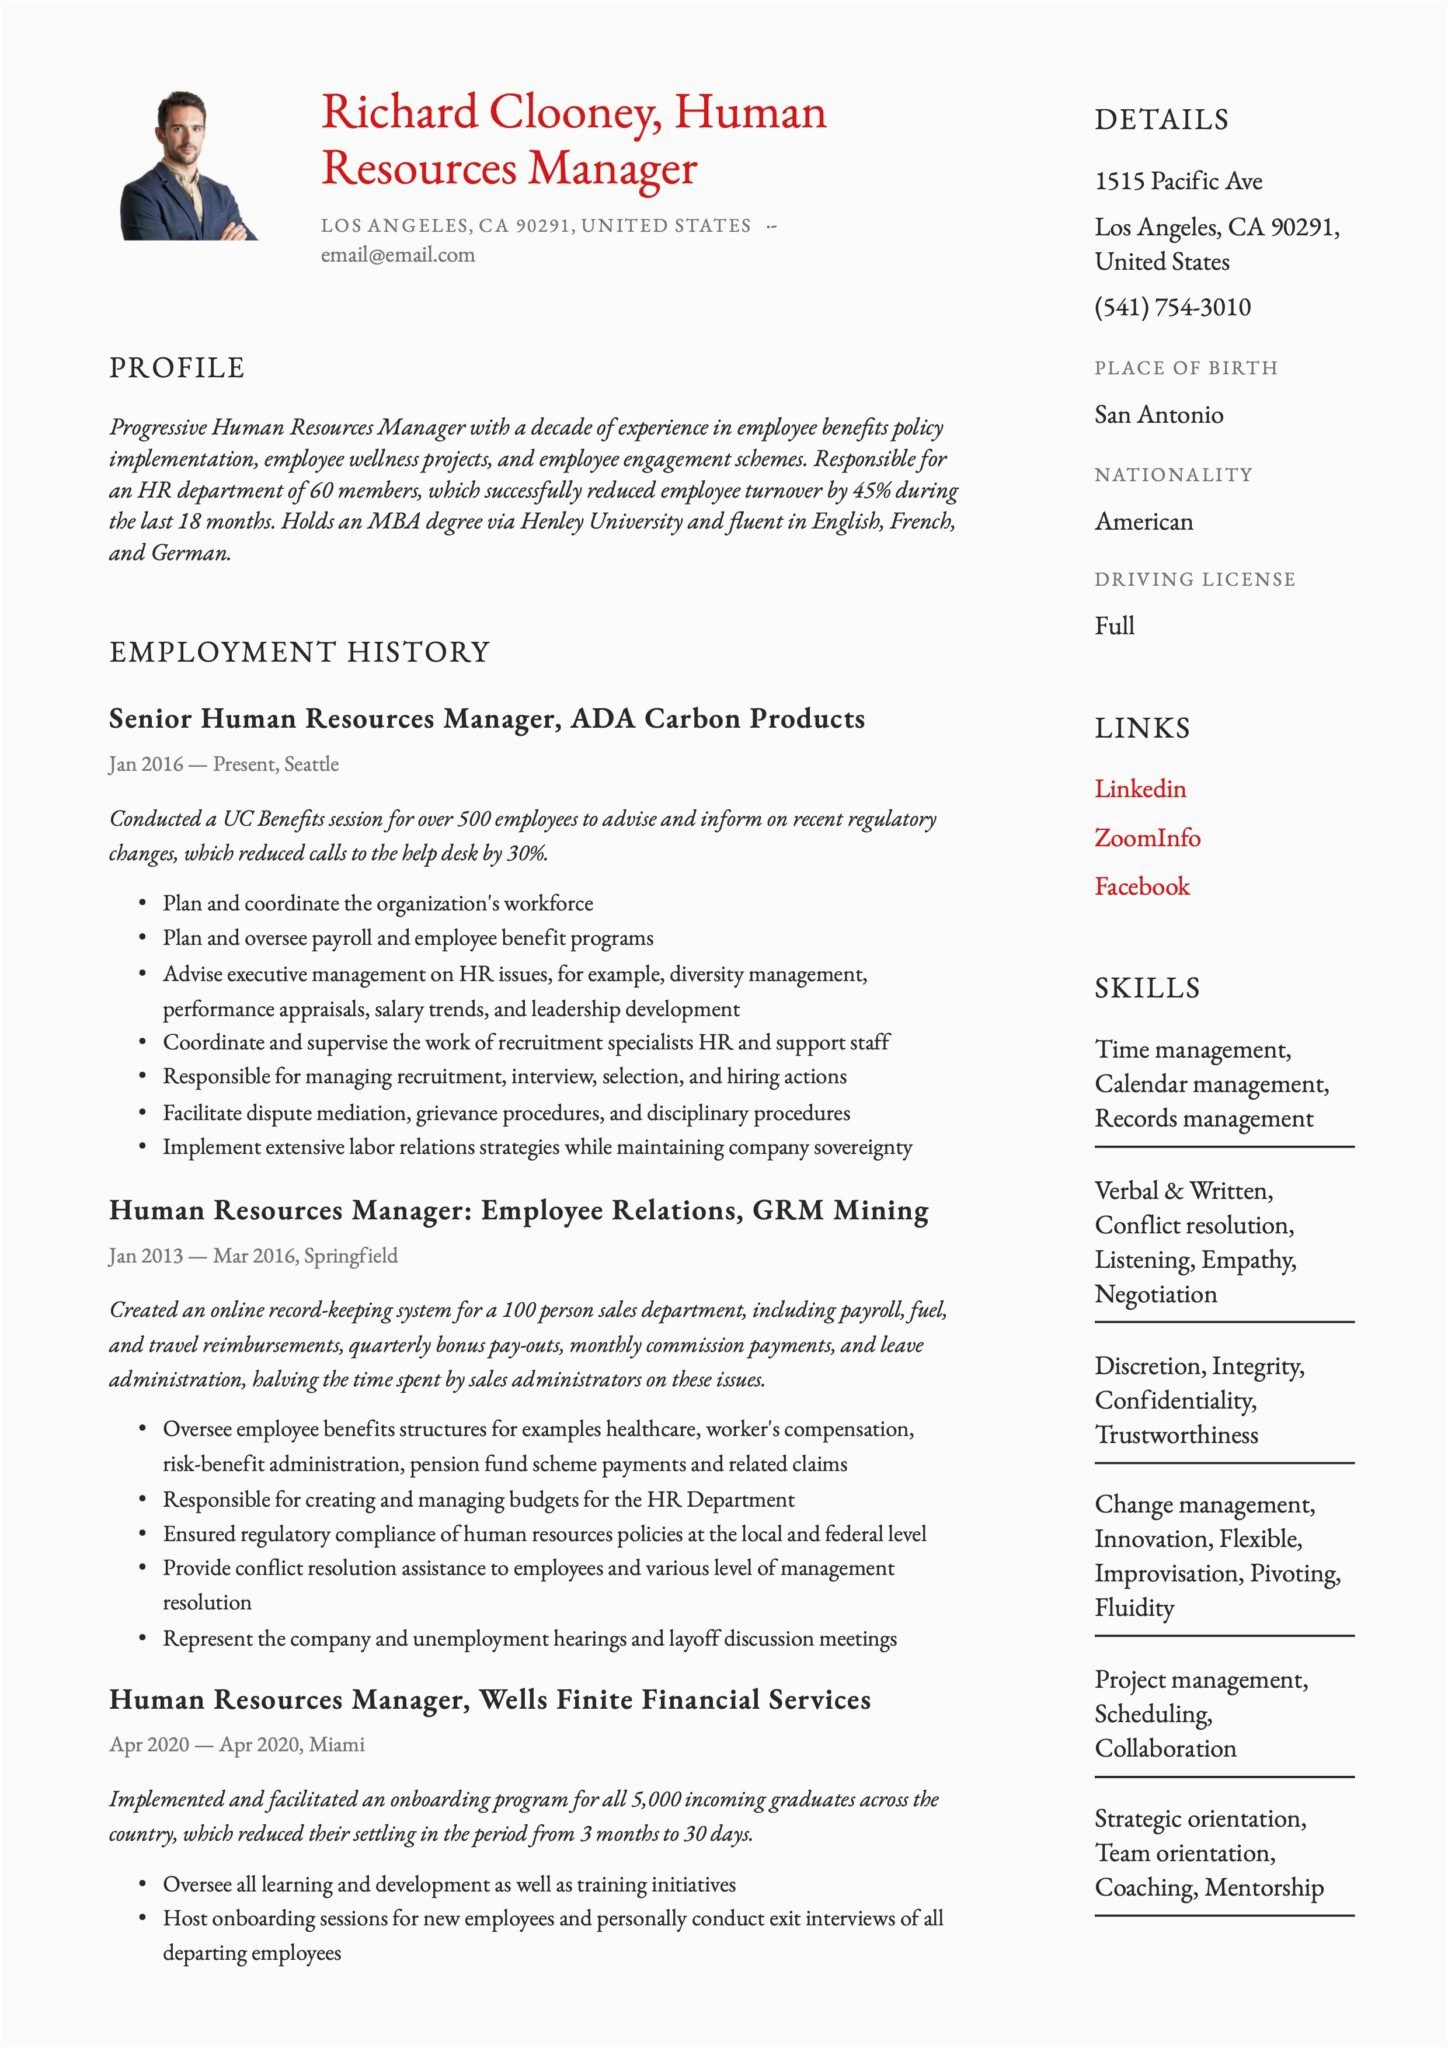 Resume Profile Samples for Human Resources 17 Human Resources Manager Resumes & Guide